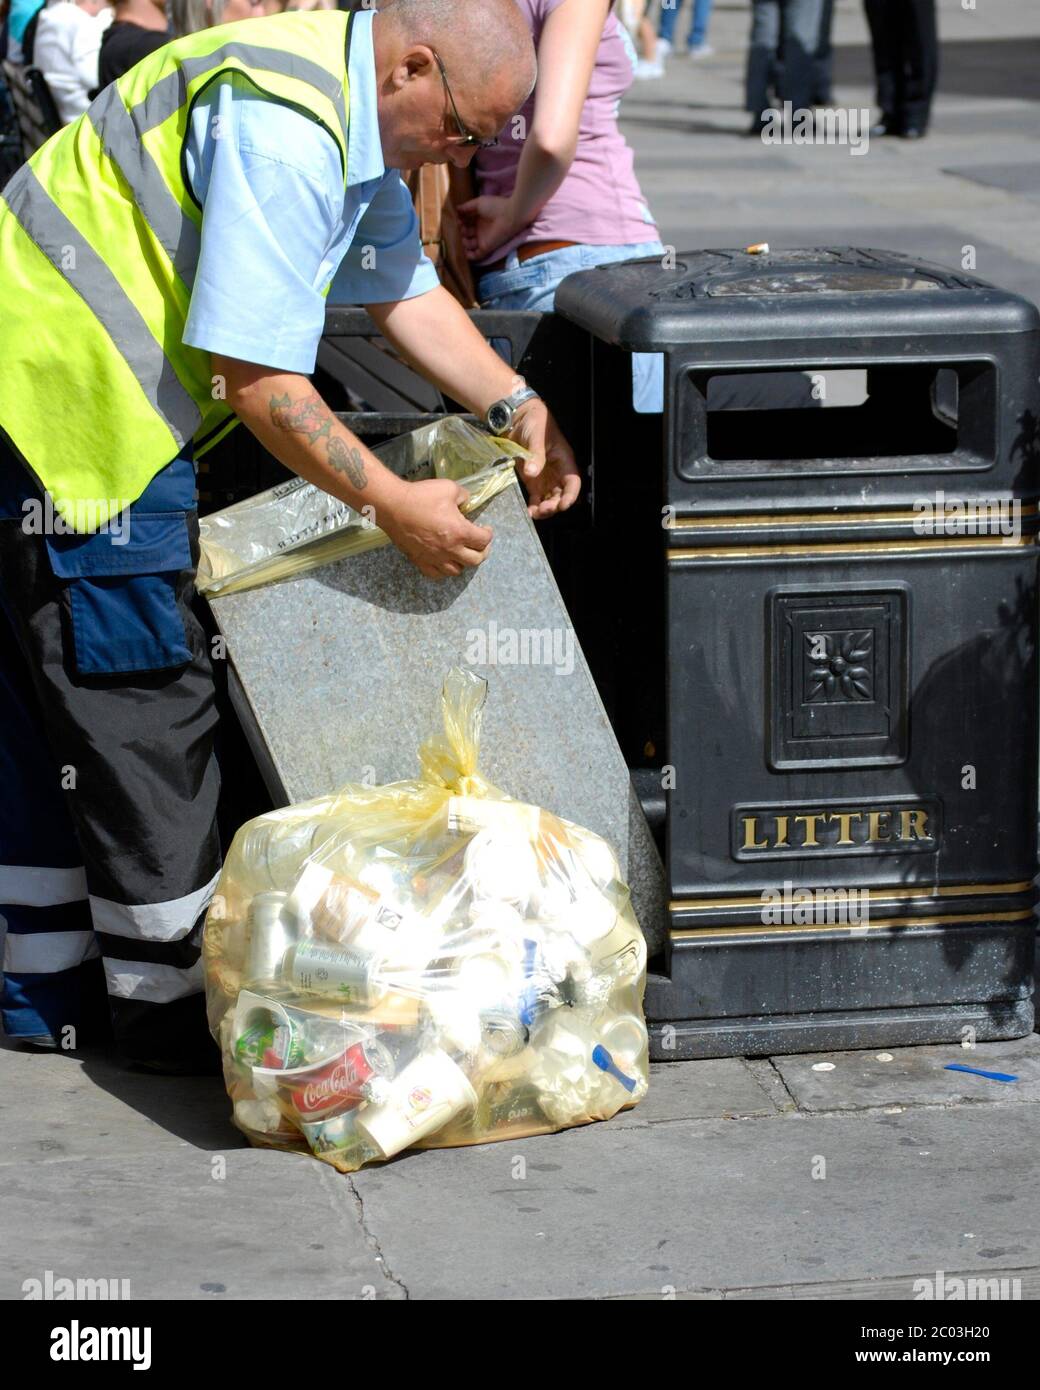 Local Authority Council worker empties public waste bin and fits new bin liner. Stock Photo